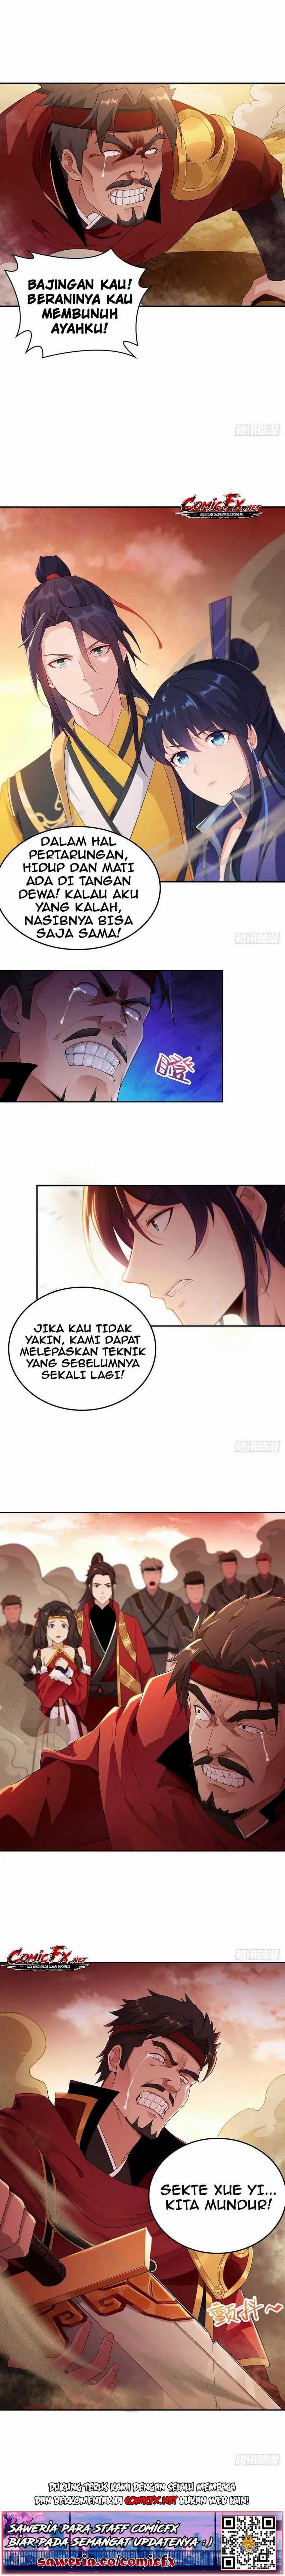 Forced To Become the Villain’s Son-in-law Chapter 62 bahasa indonesia